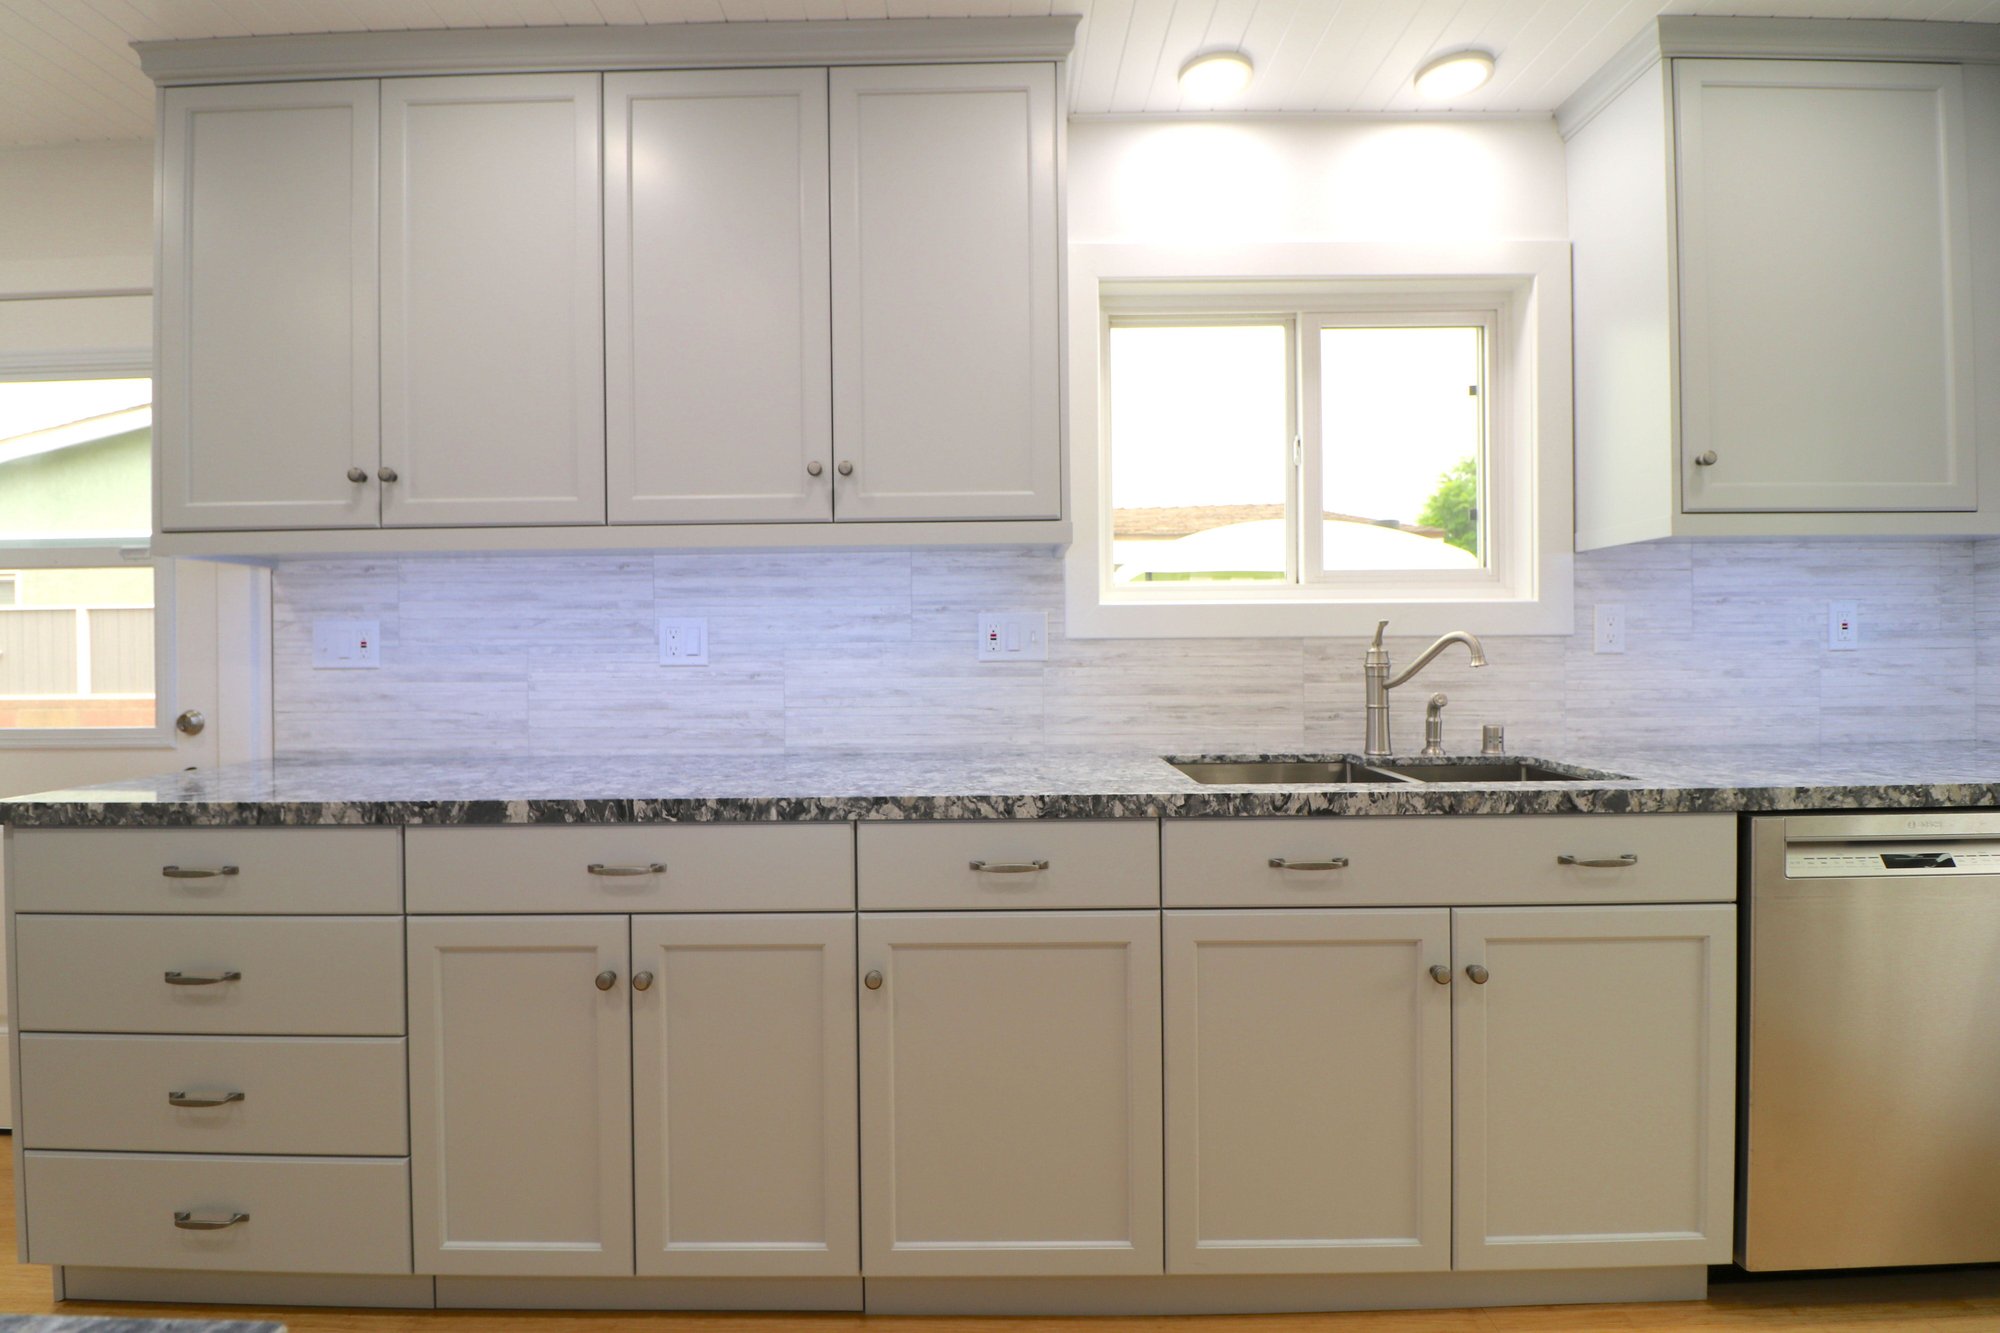 Torrance Kitchen Remodel - Contractor - Custom Cabinetry